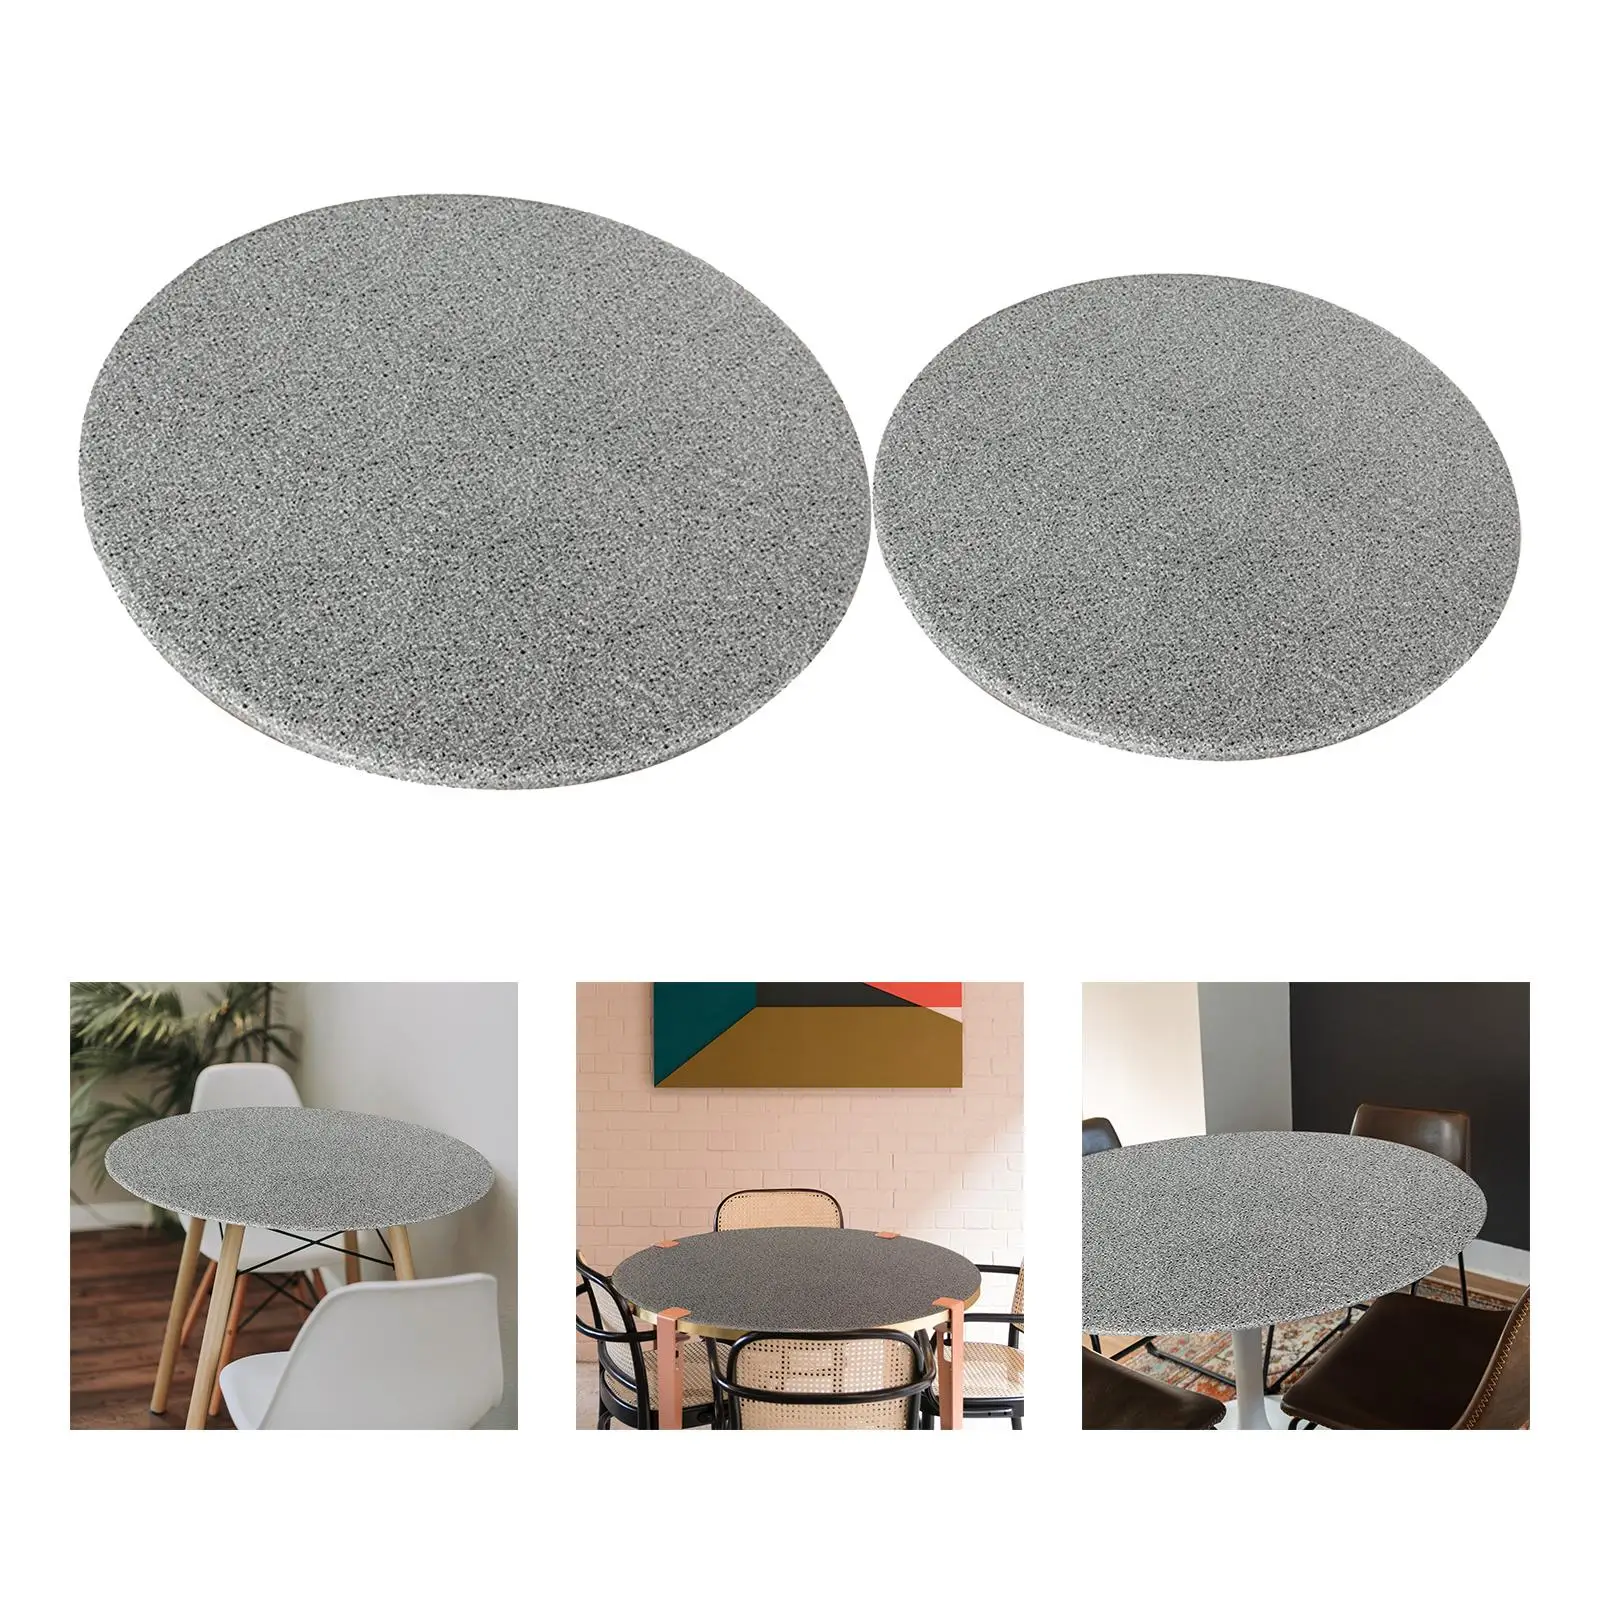 Oilproof Round Table Cloth Elasticized Table Cover Flannel Backing Granite Pattern Tablecloth for Banquet Dining Table Picnic